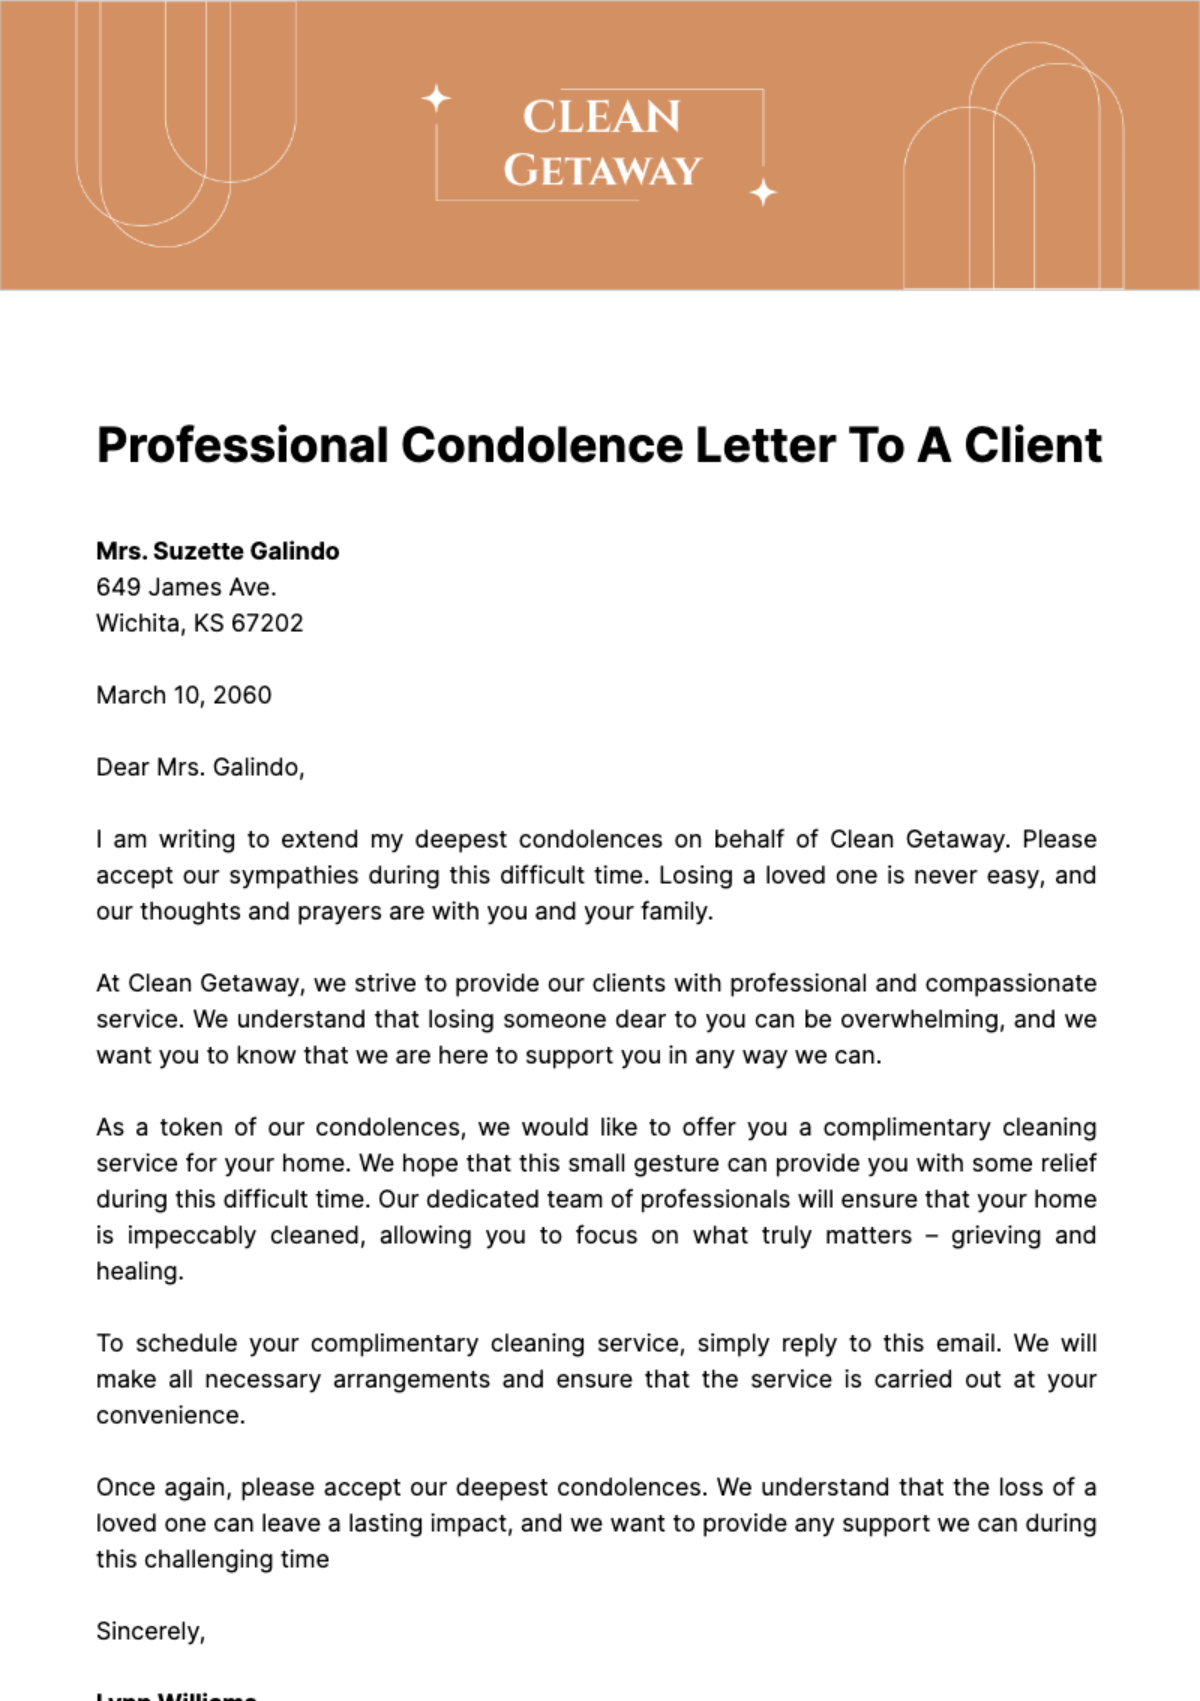 Professional Condolence Letter to a Client Template